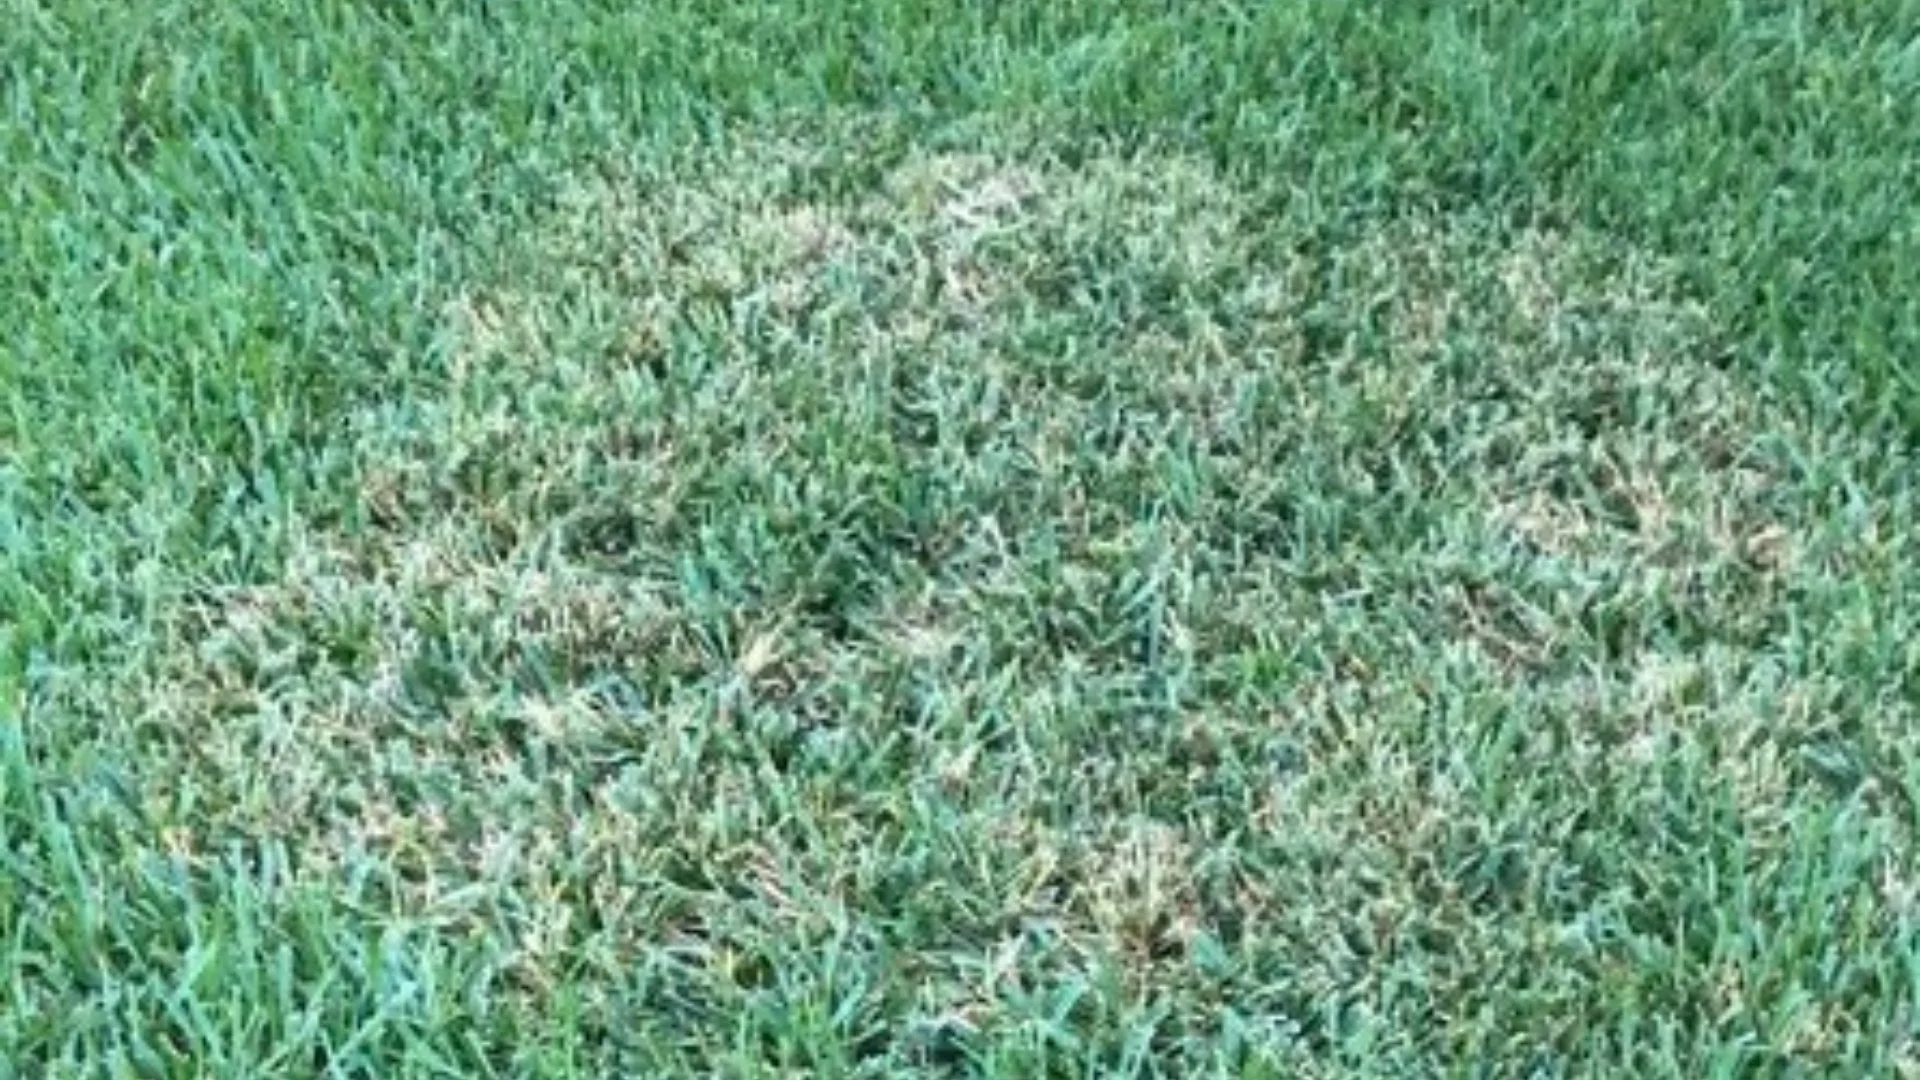 The Ultimate Guide to Preventing & Treating Brown Patch Lawn Disease